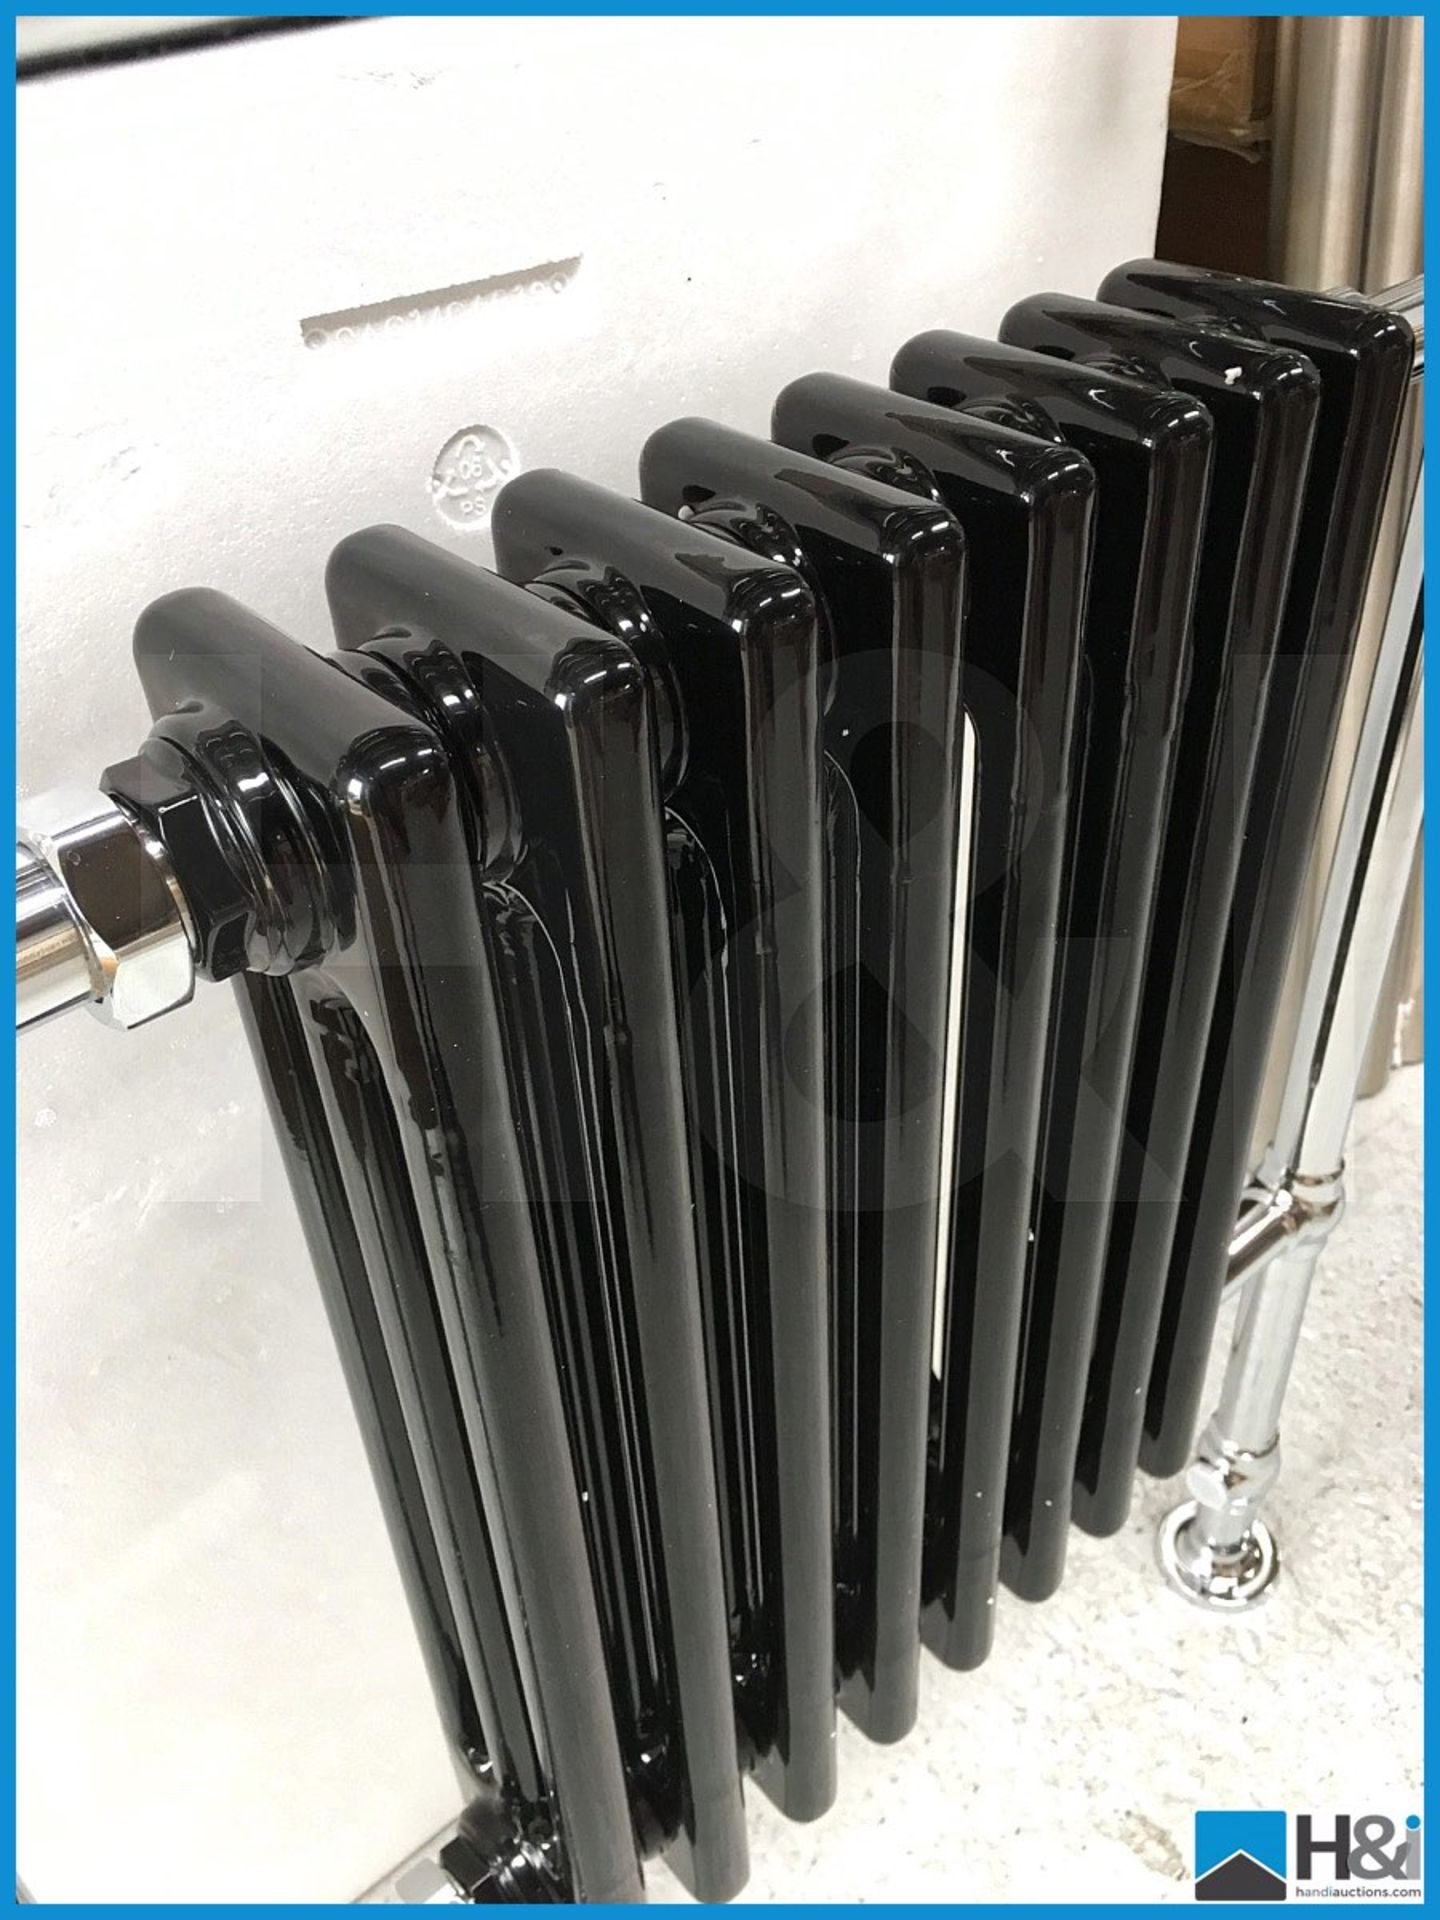 Designer centre column black traditional radiator with polished chrome rails. New and boxed. - Image 3 of 6